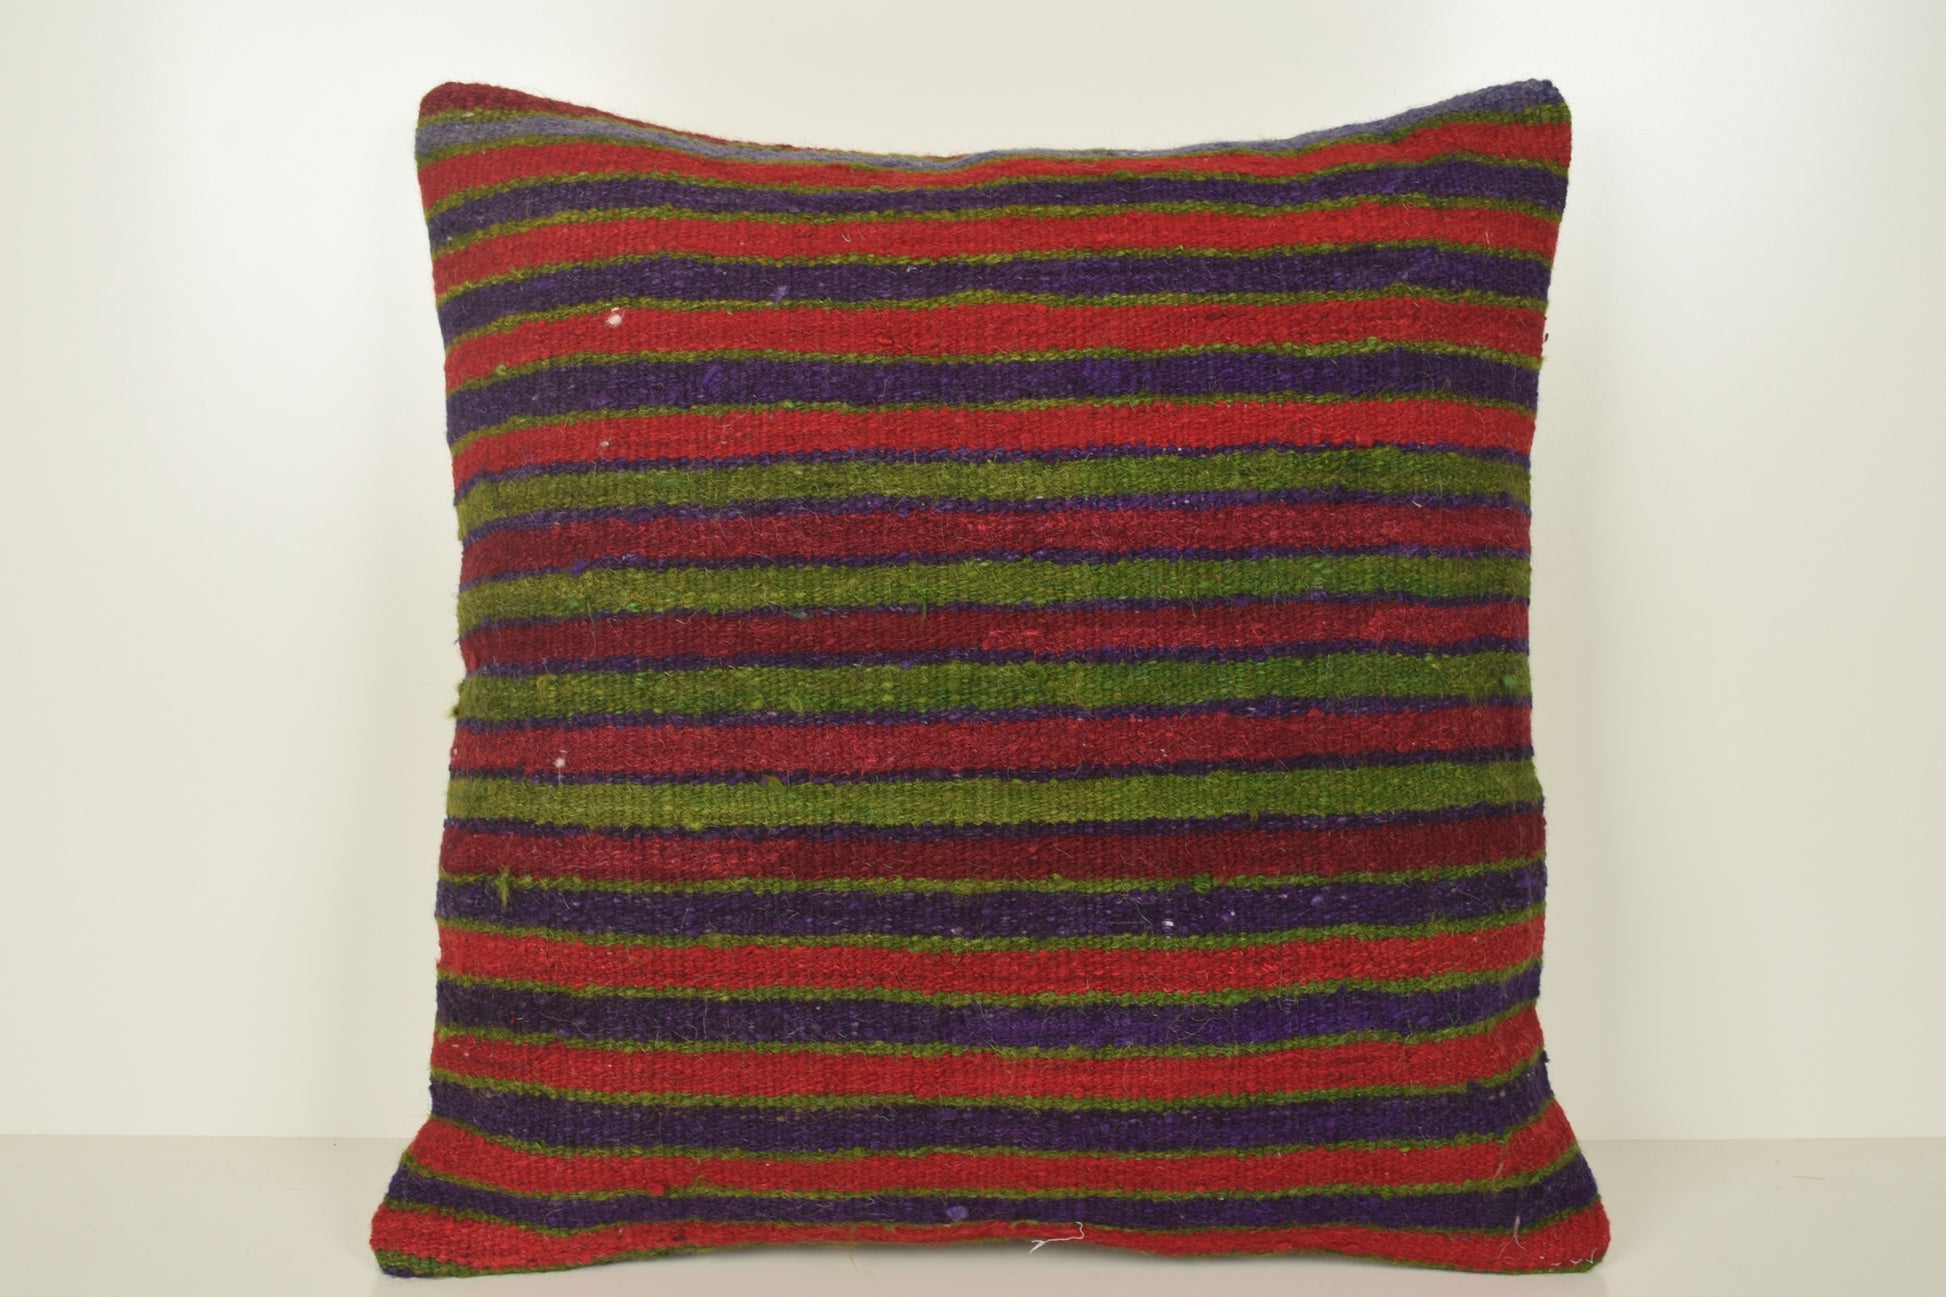 Kilim Cushions Sydney A01004 24x24 Gift Needlework Country Normal